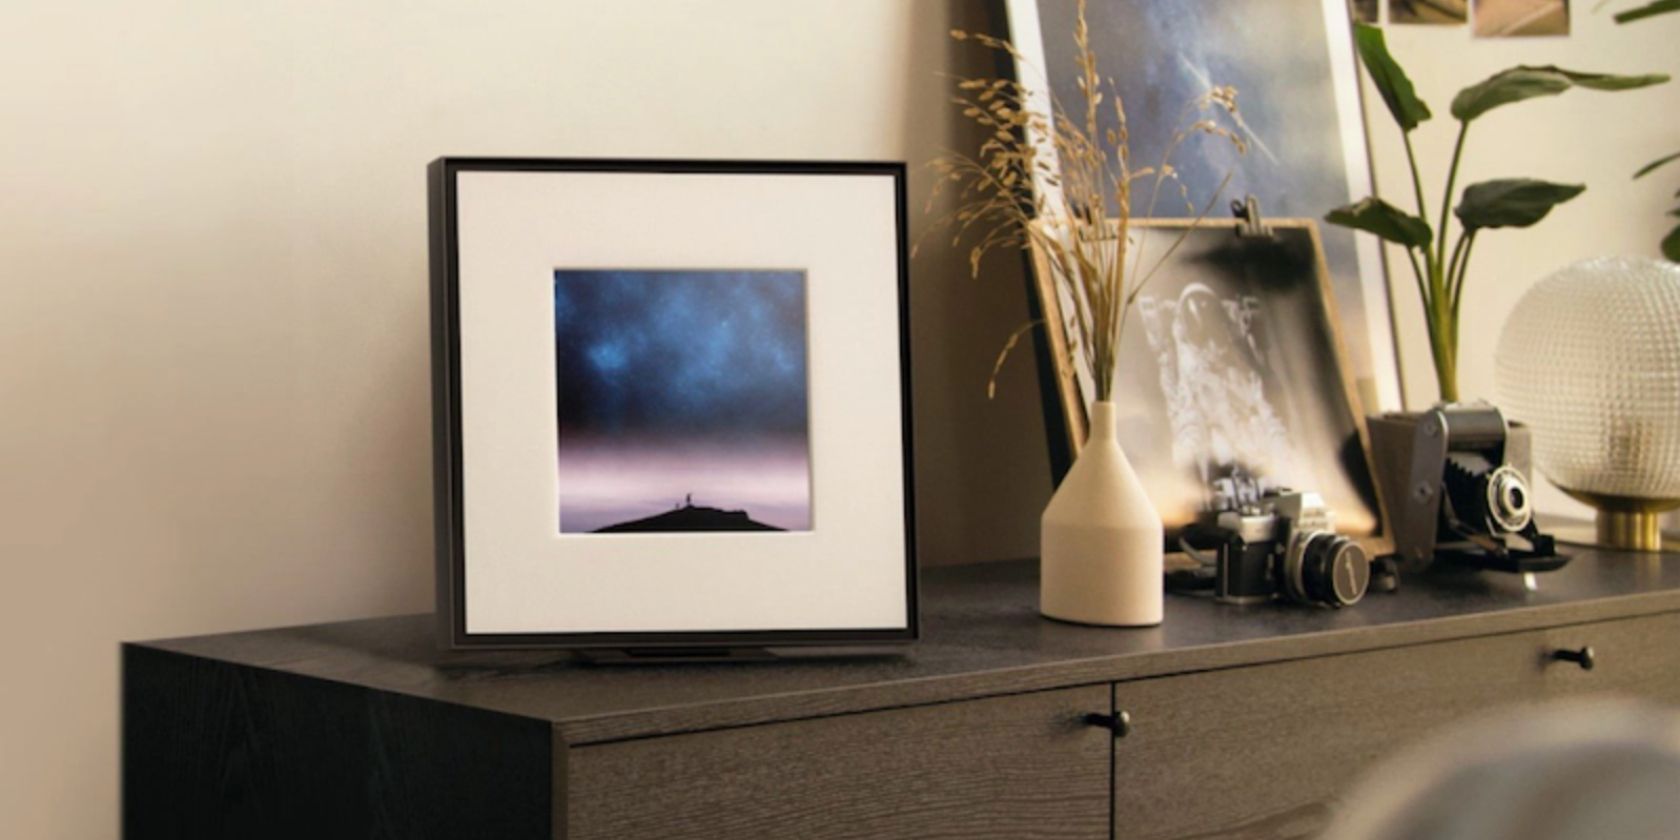 The Samsung Music Frame placed on a chest of drawers